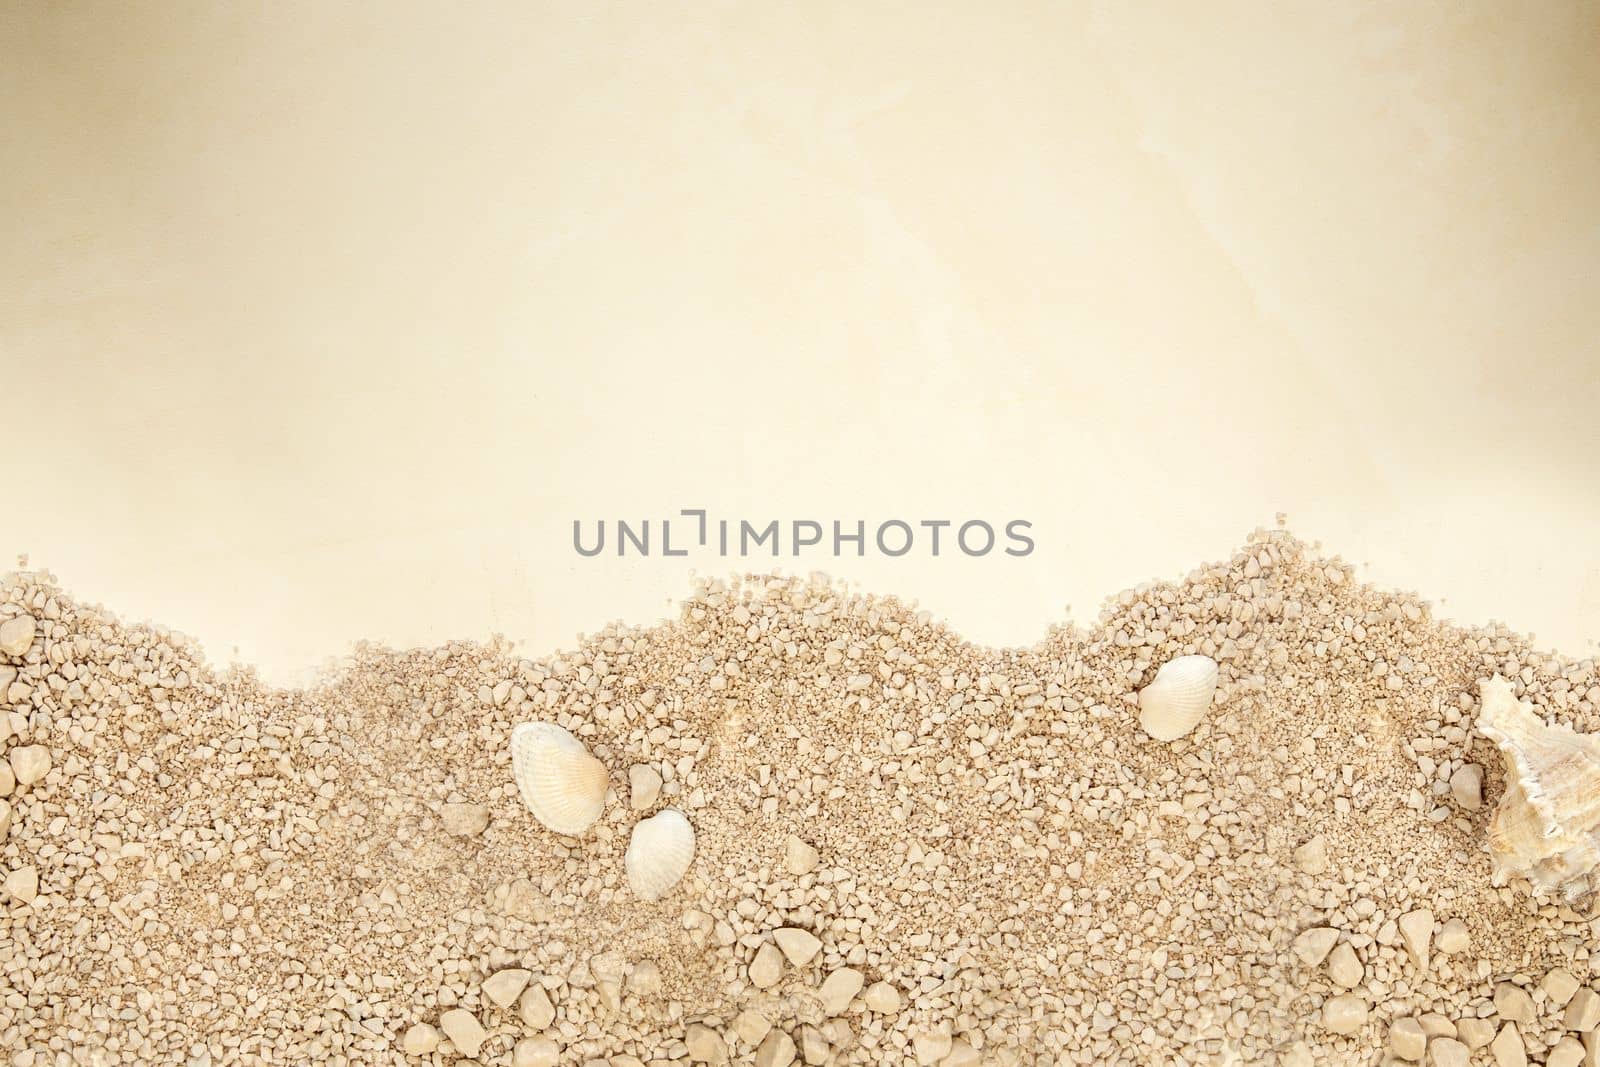 Beach sand texture with sea shells. Sandy beach for background. Top view bounty island copy space background texture, Summer Holiday concept tropical beauty